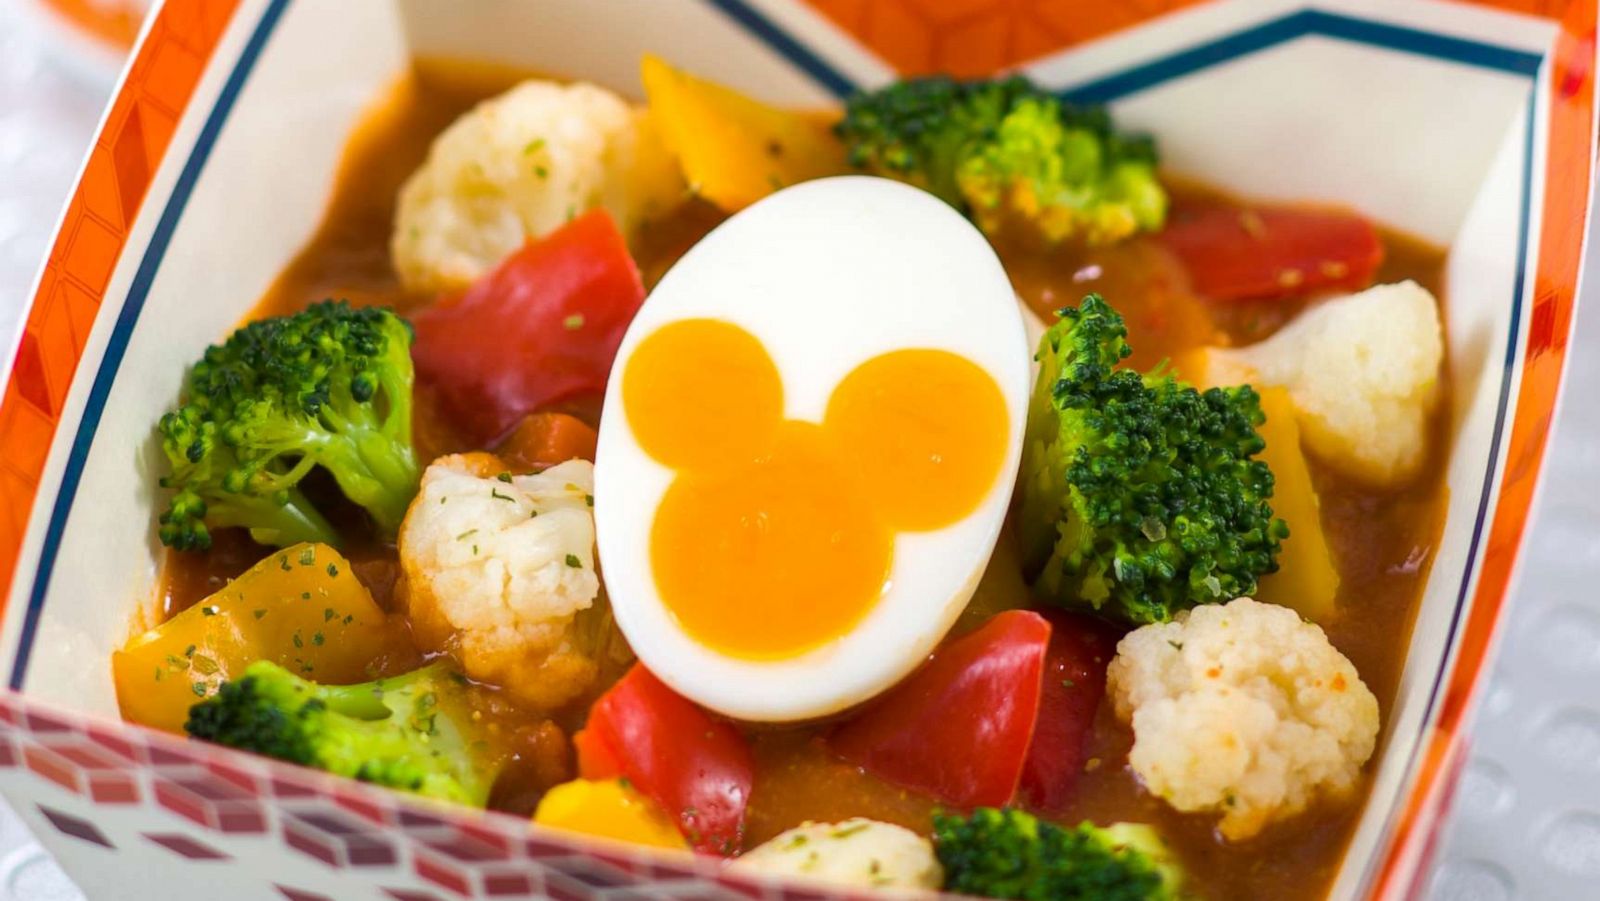 Tokyo Disneyland S Mickey Shaped Soft Boiled Eggs Make The Most Magical Rice Bowl Gma